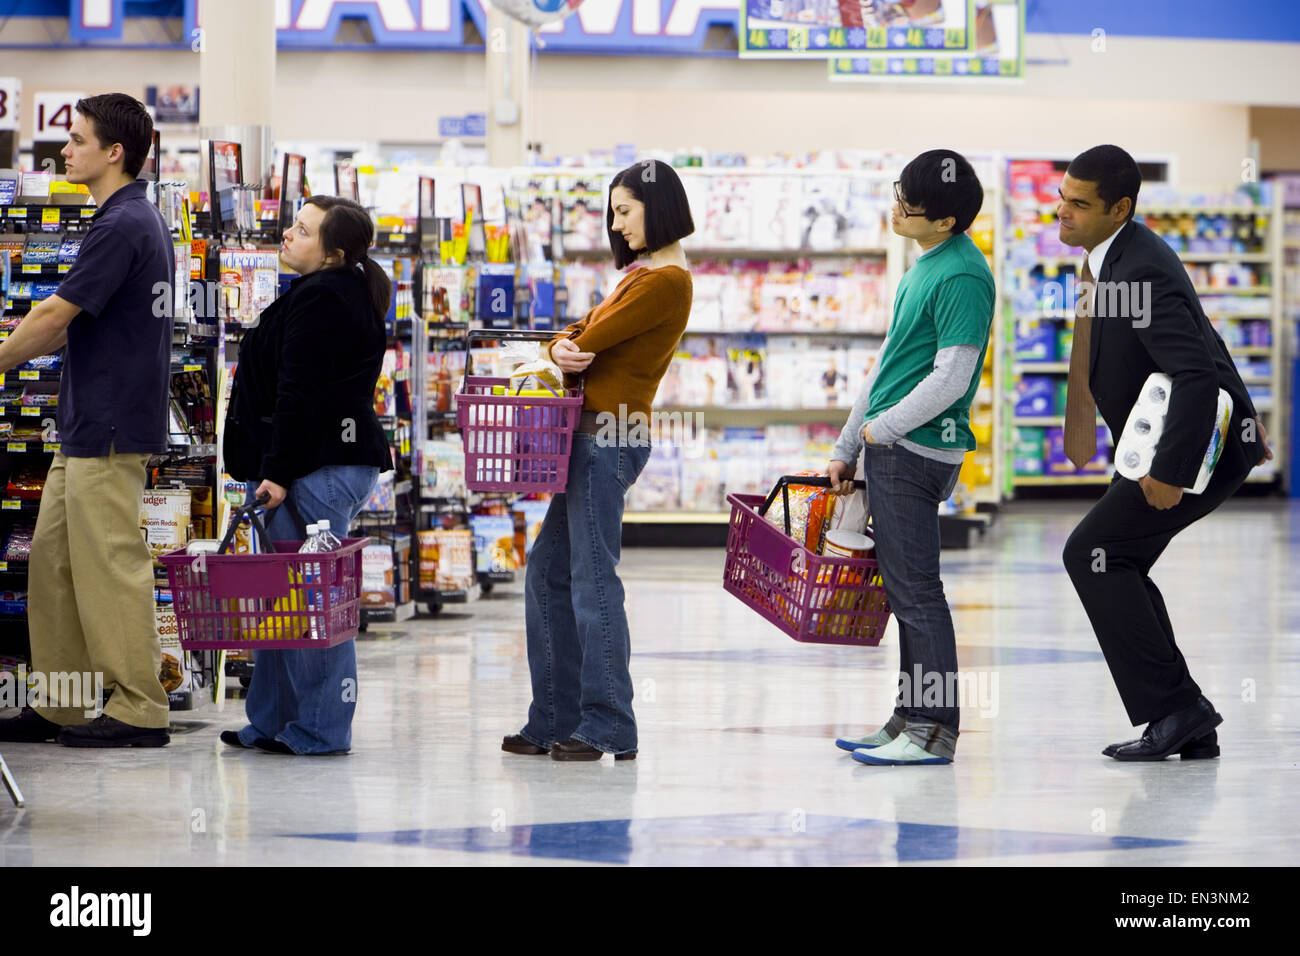 People waiting in line with shopping baskets at grocery store Stock Photo